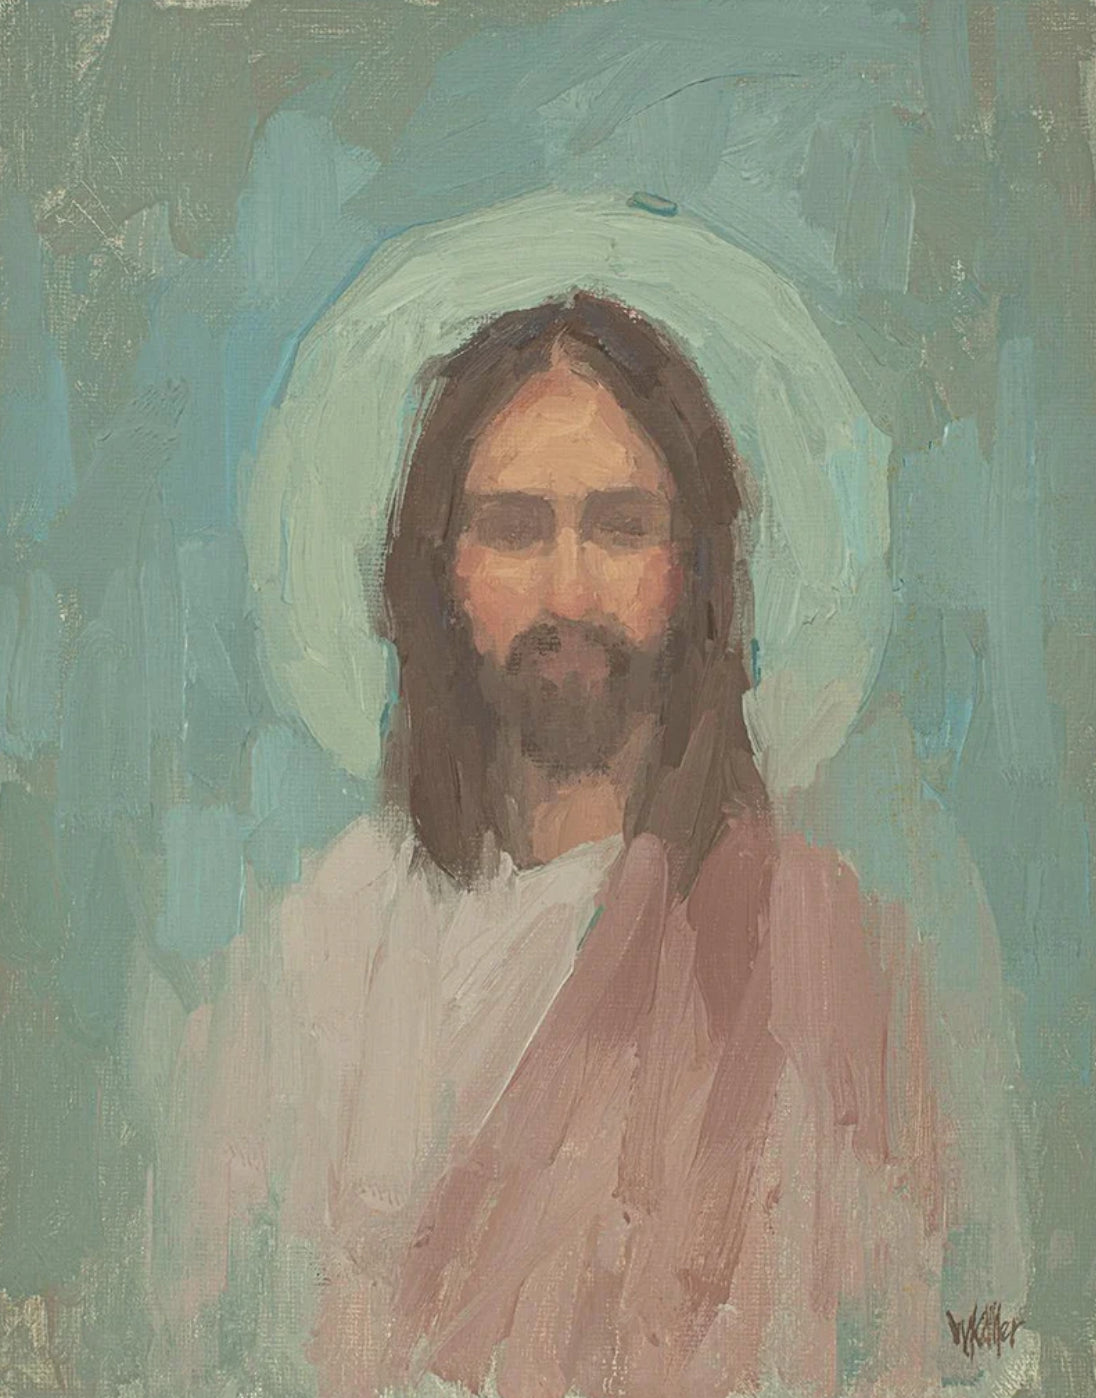 IMAGES OF JESUS